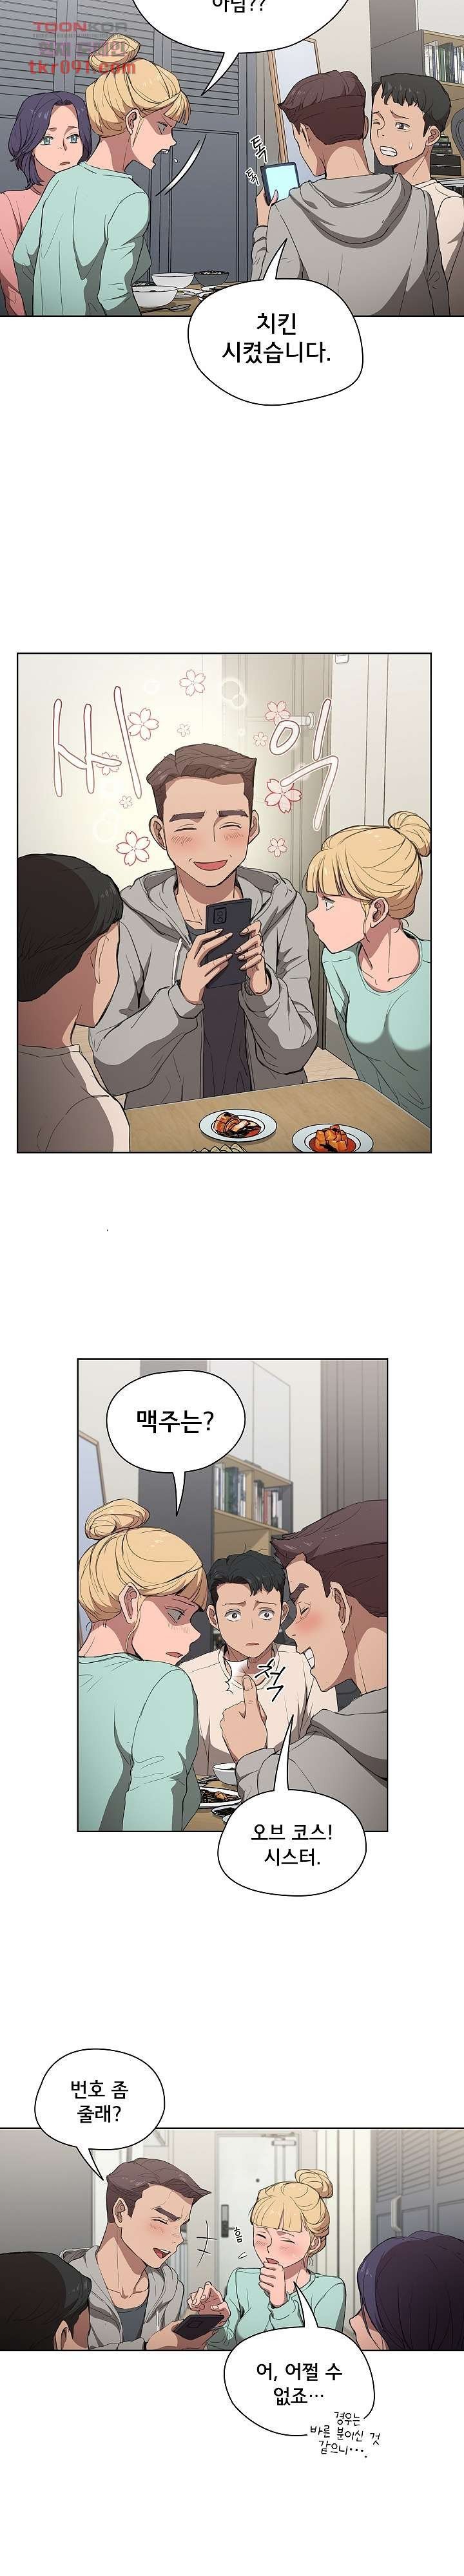 how-about-getting-lost-raw-chap-36-2